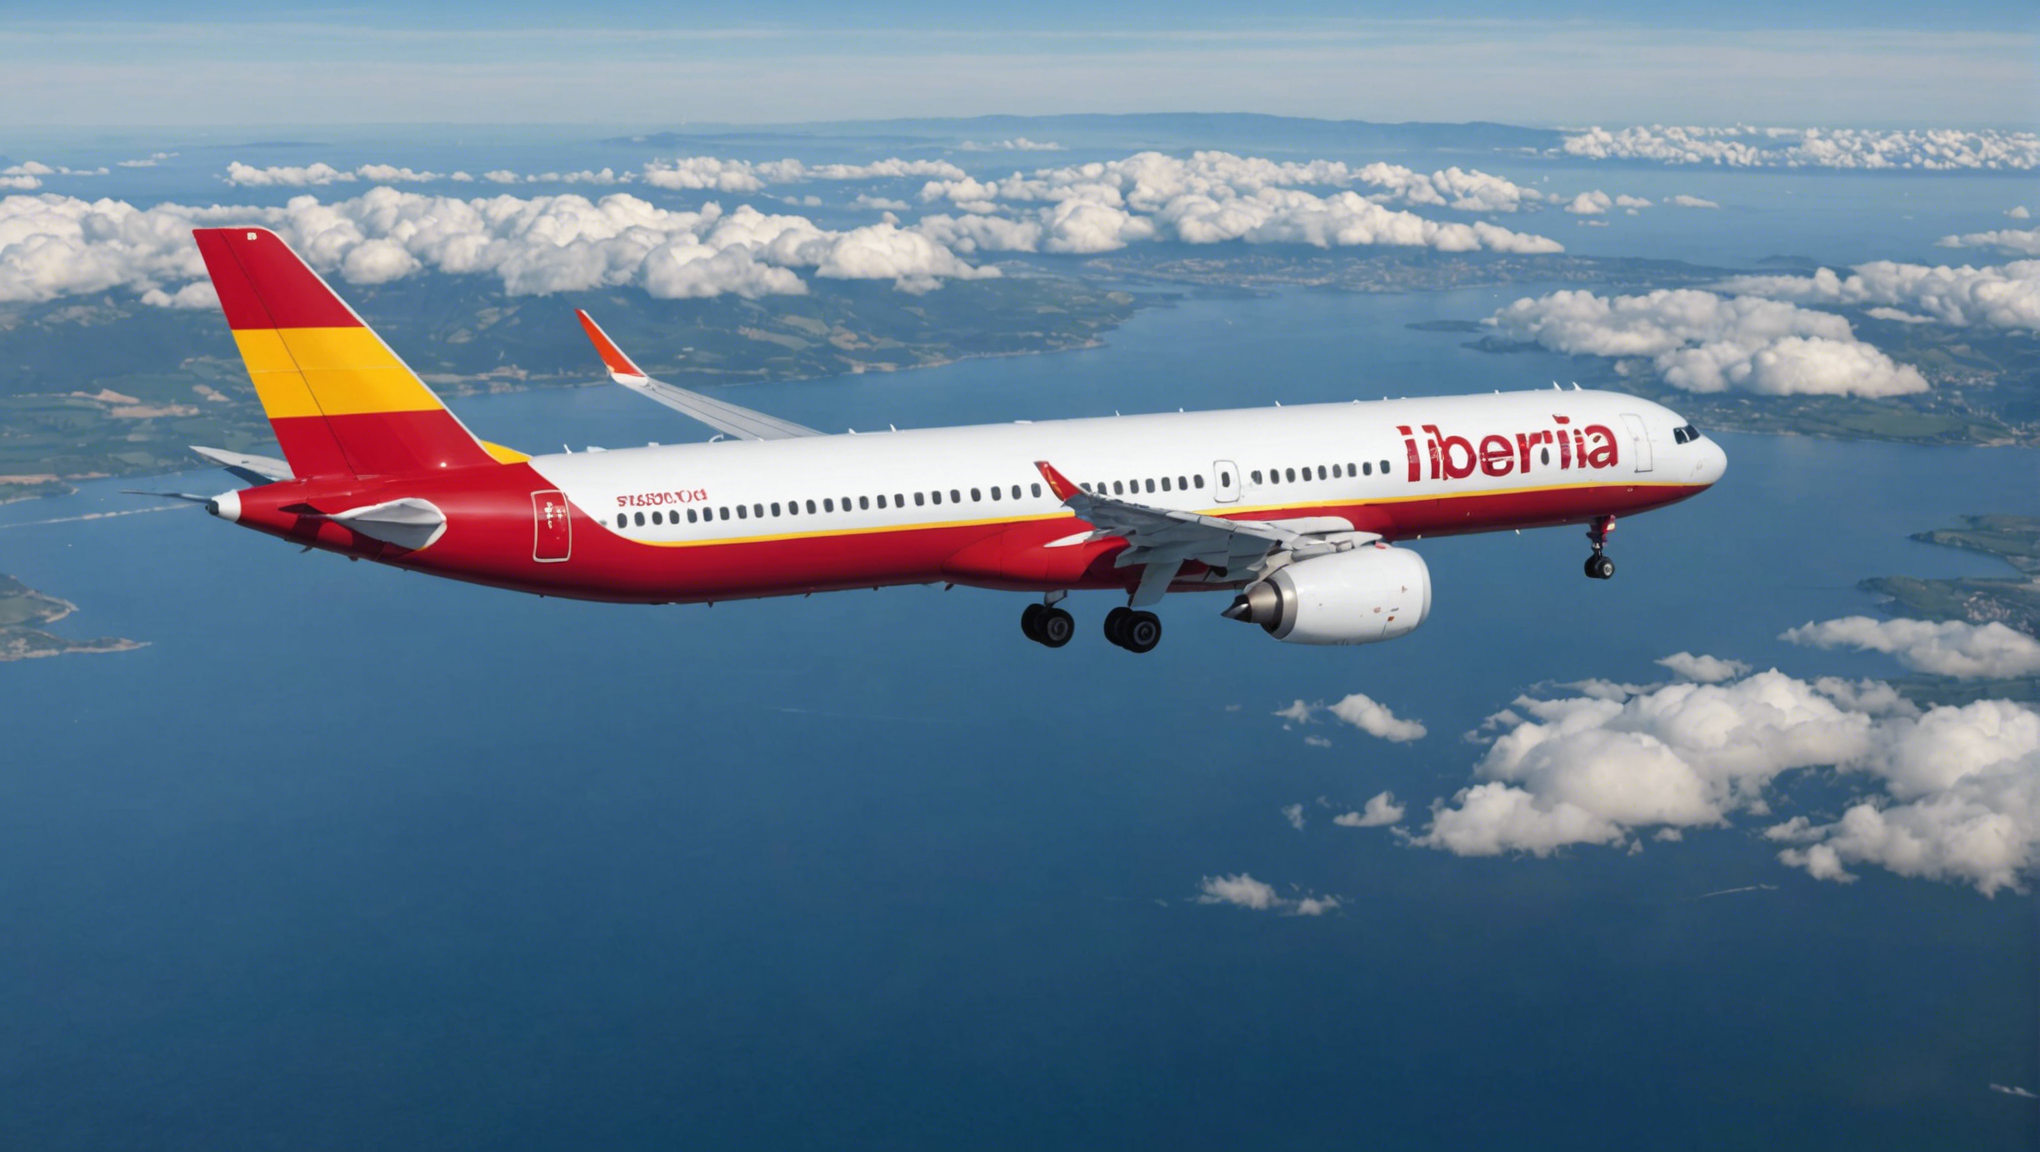 find out how to book your transatlantic flights in an airbus a321xlr with iberia, europe's leading airline.